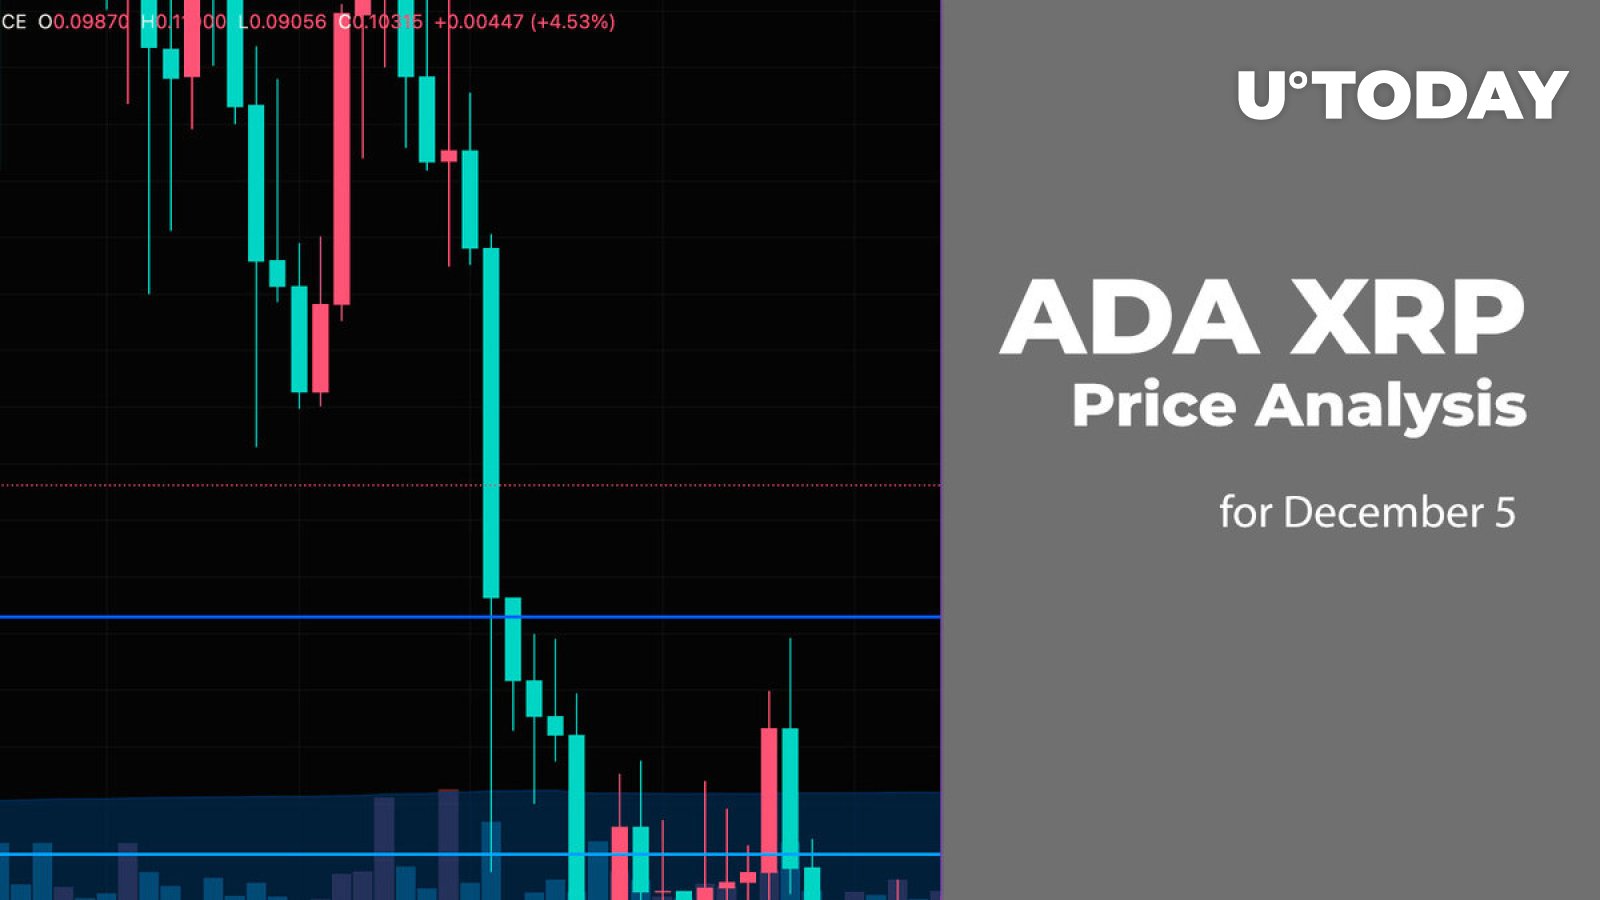 ADA and XRP Price Analysis for December 5